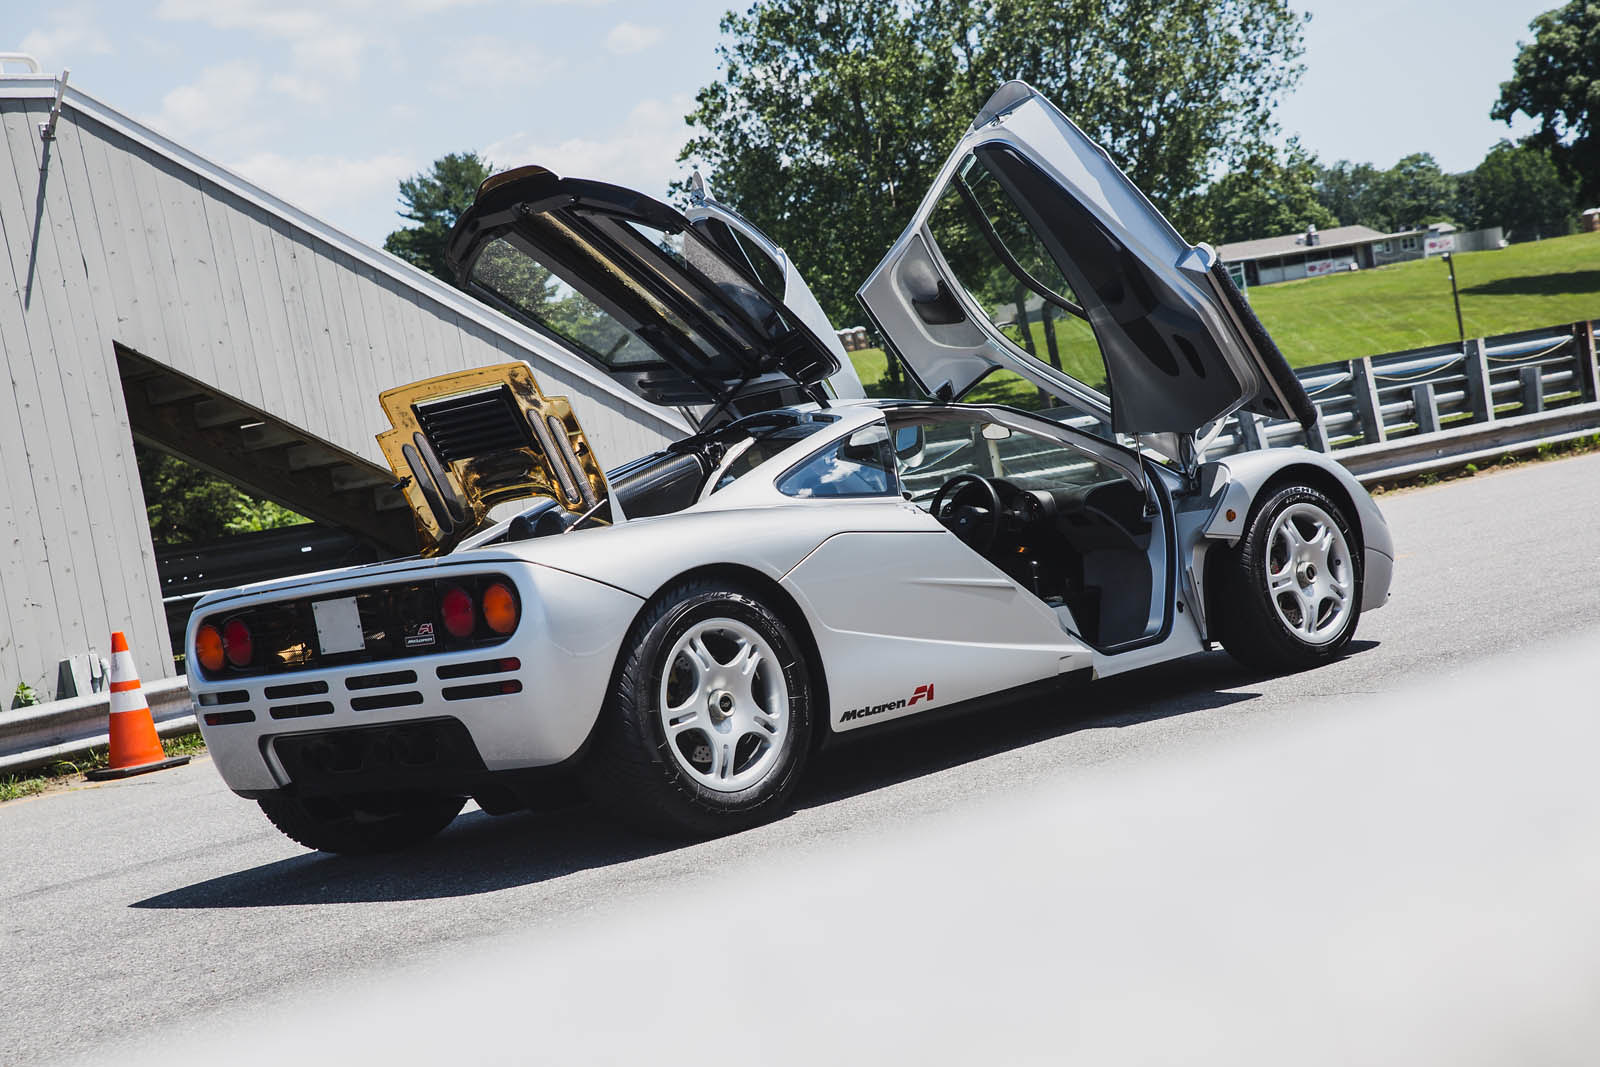 The unbelievable running costs of a McLaren F1 revealed by an